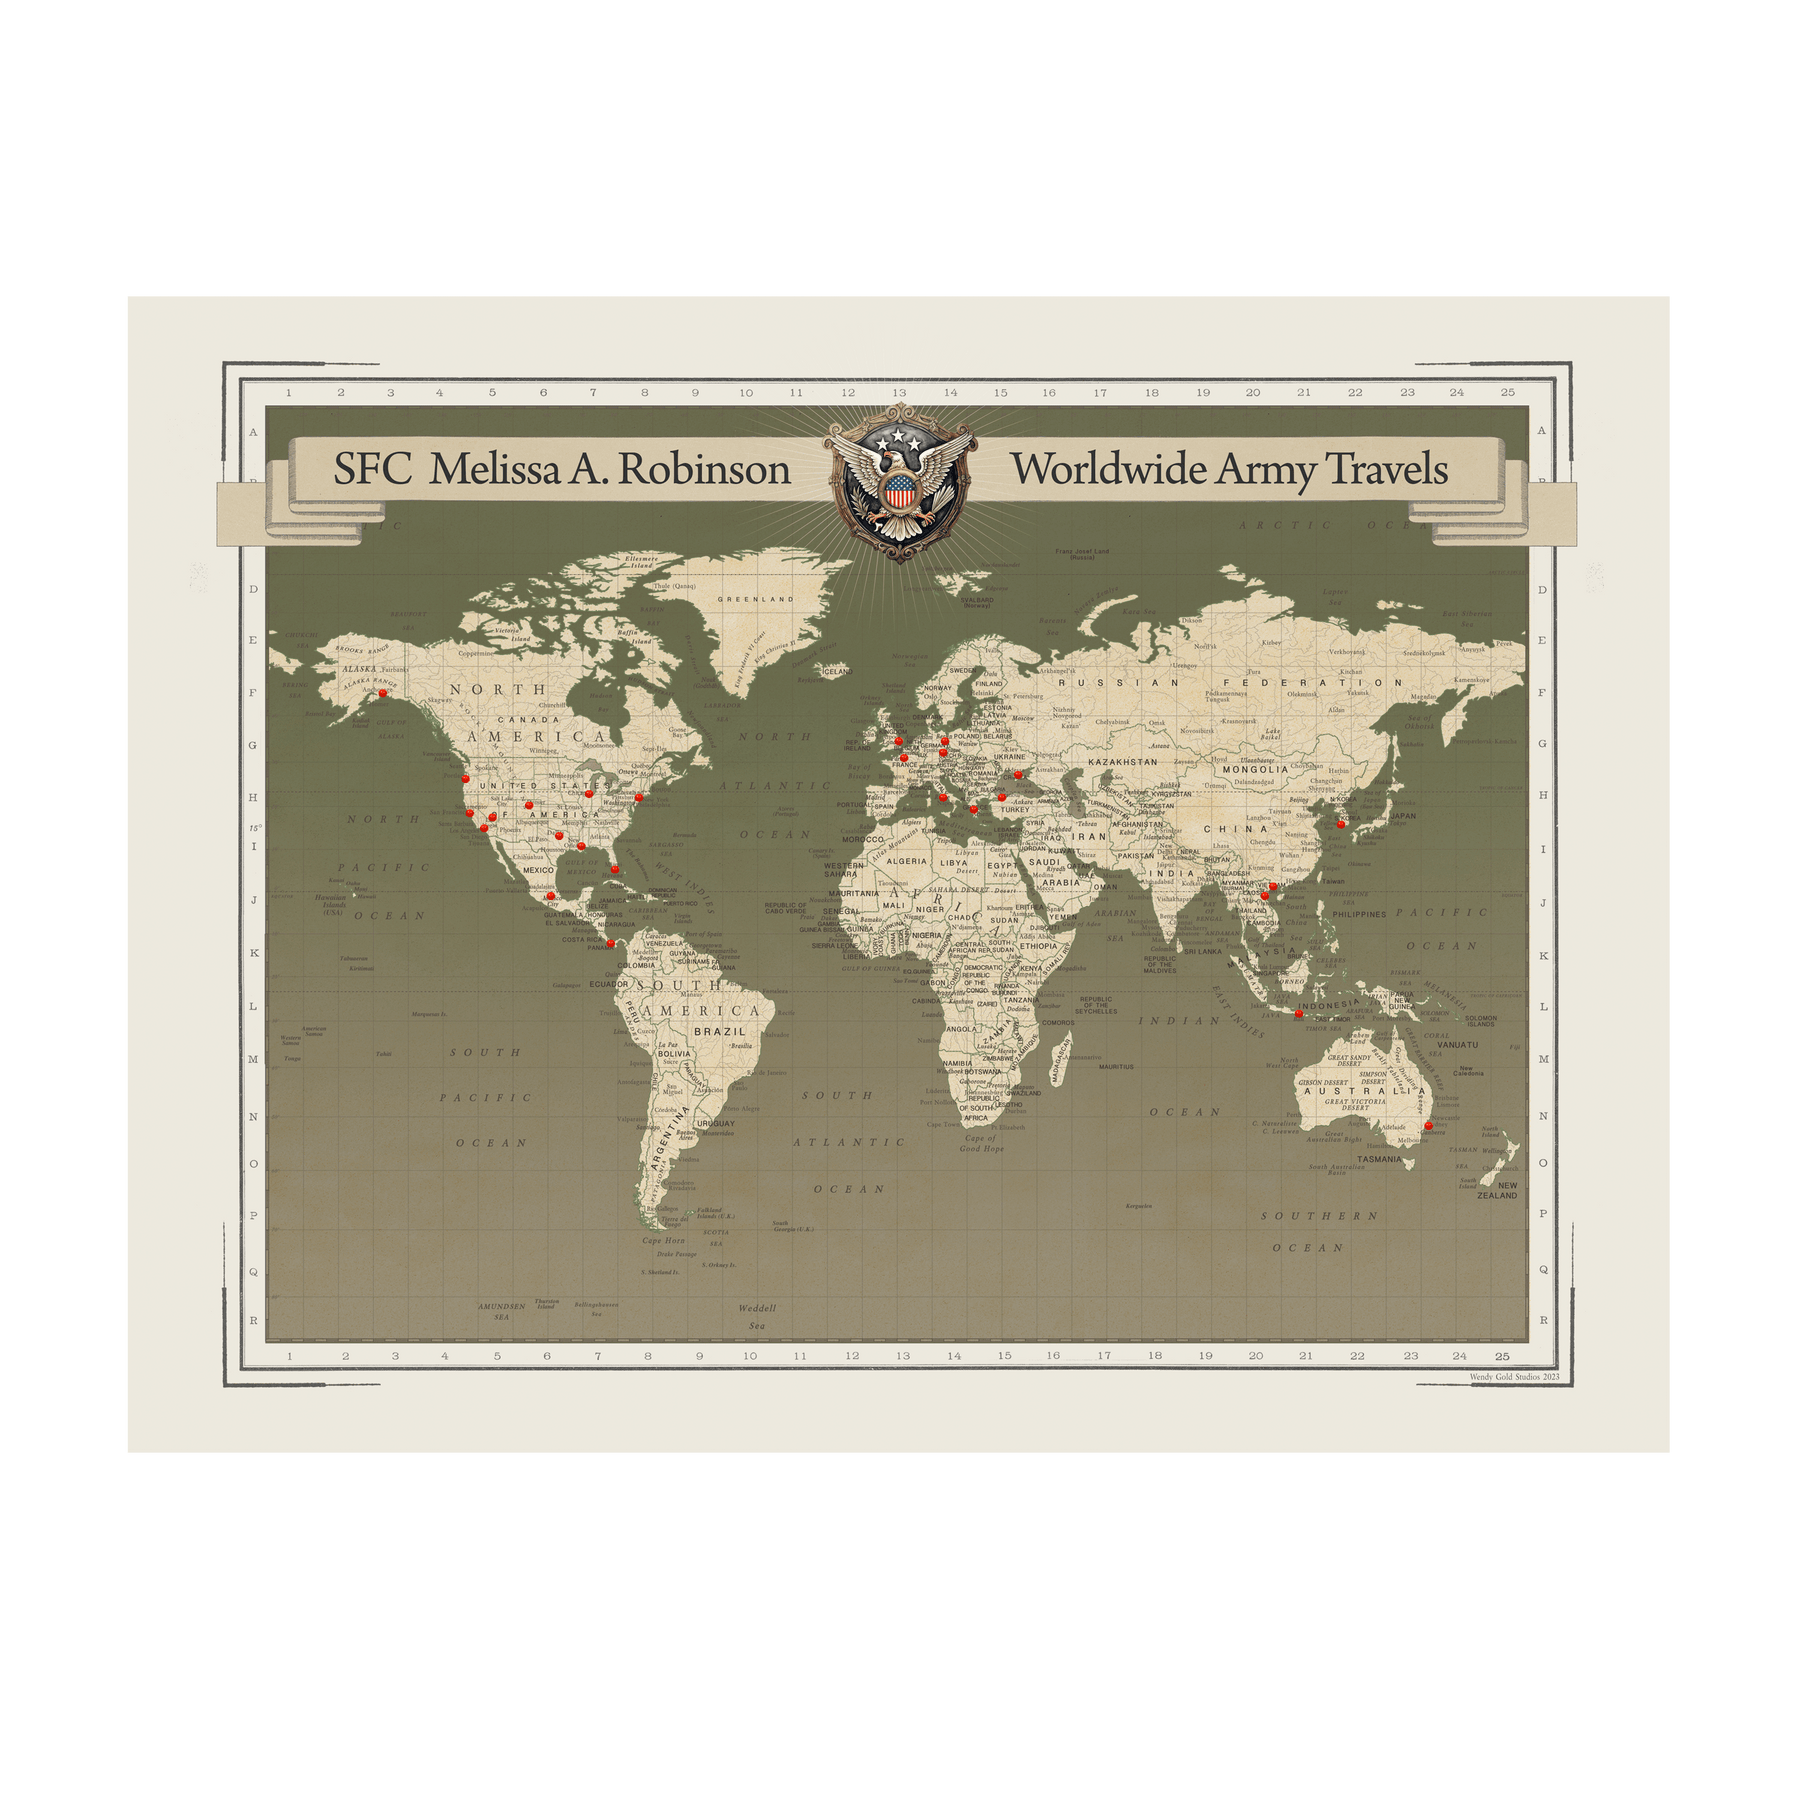 Military Family Push Pin World Map, Long Distance Love Map